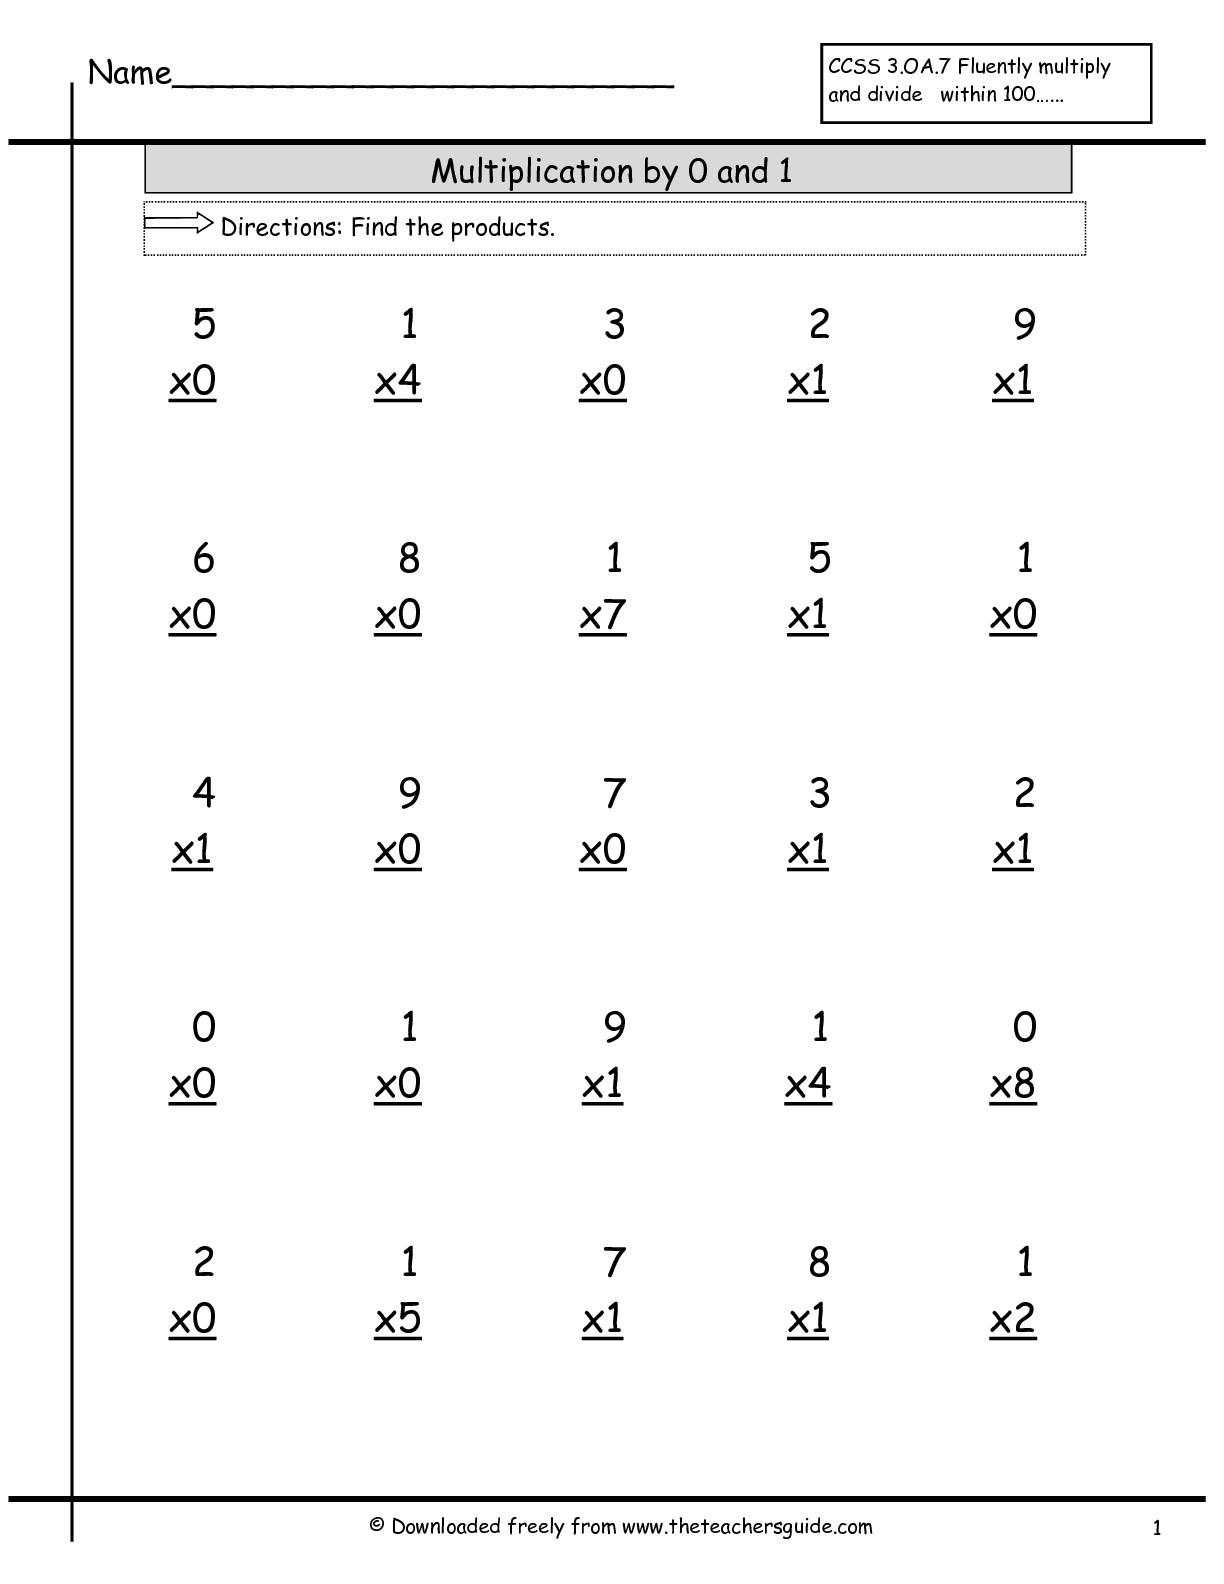 Multiplication Facts Worksheets From The Teacher&amp;#039;s Guide regarding Multiplication Worksheets 7 Facts